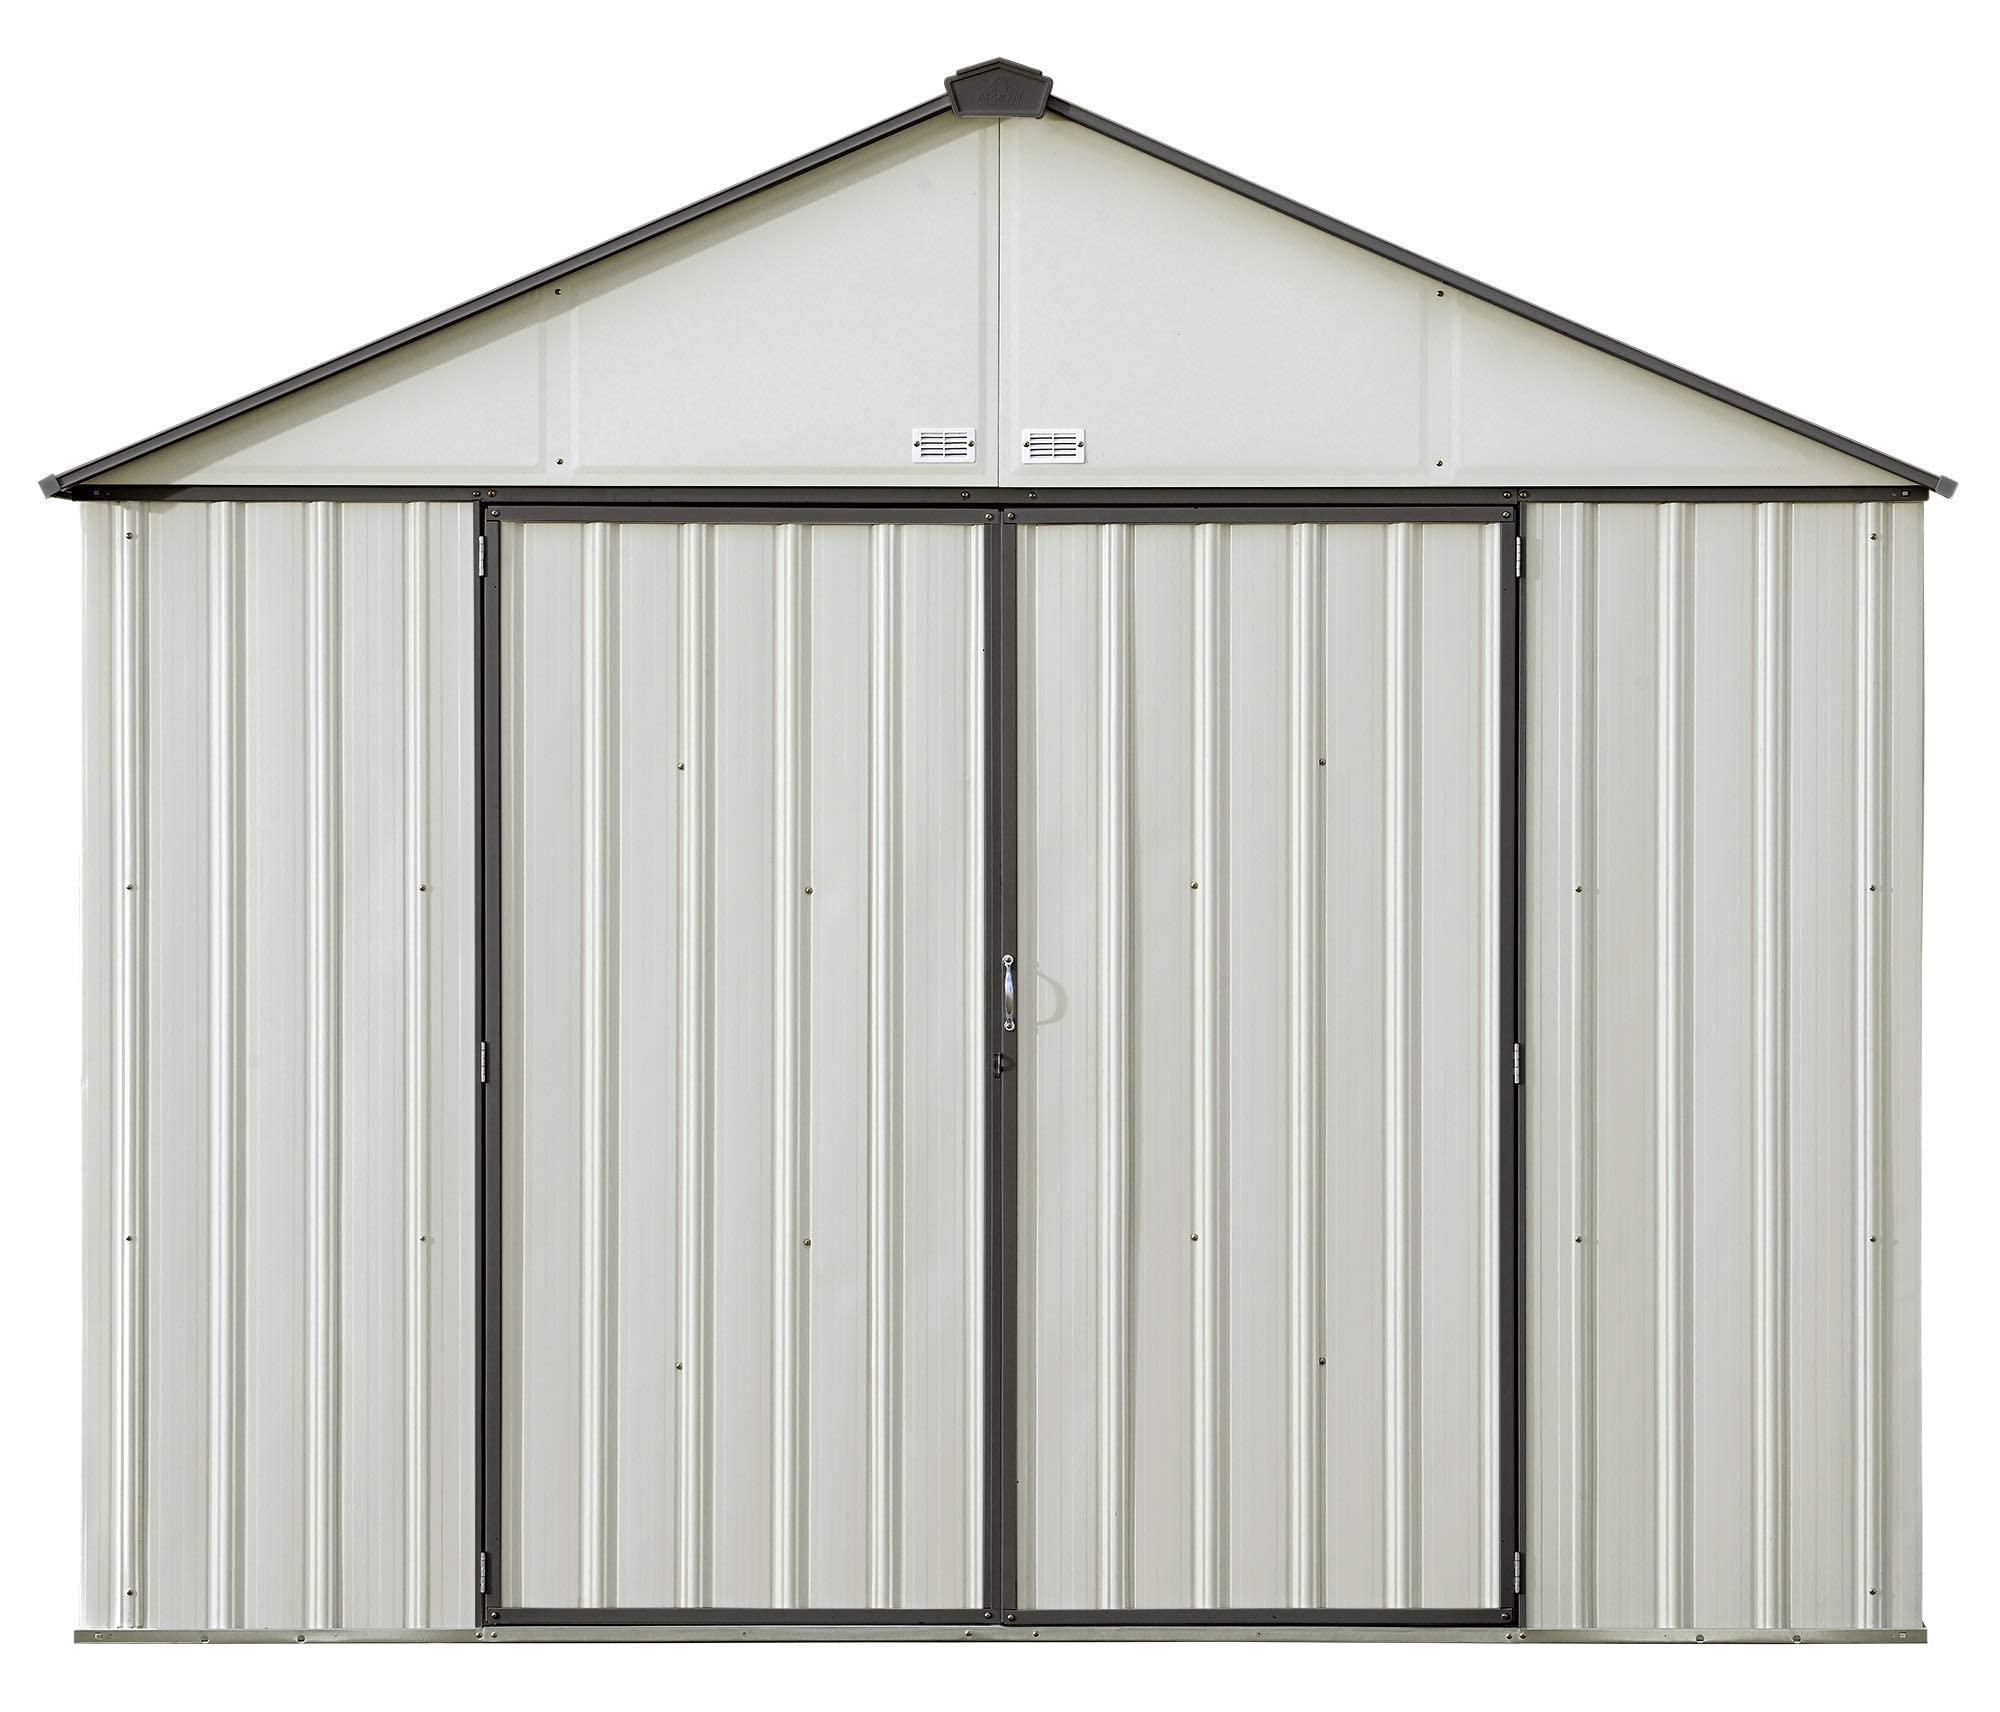 Arrow Shed Arrow 10' X 8' Ezee Shed Cream With Charcoal Trim Extra High Gable Steel Storage Shed